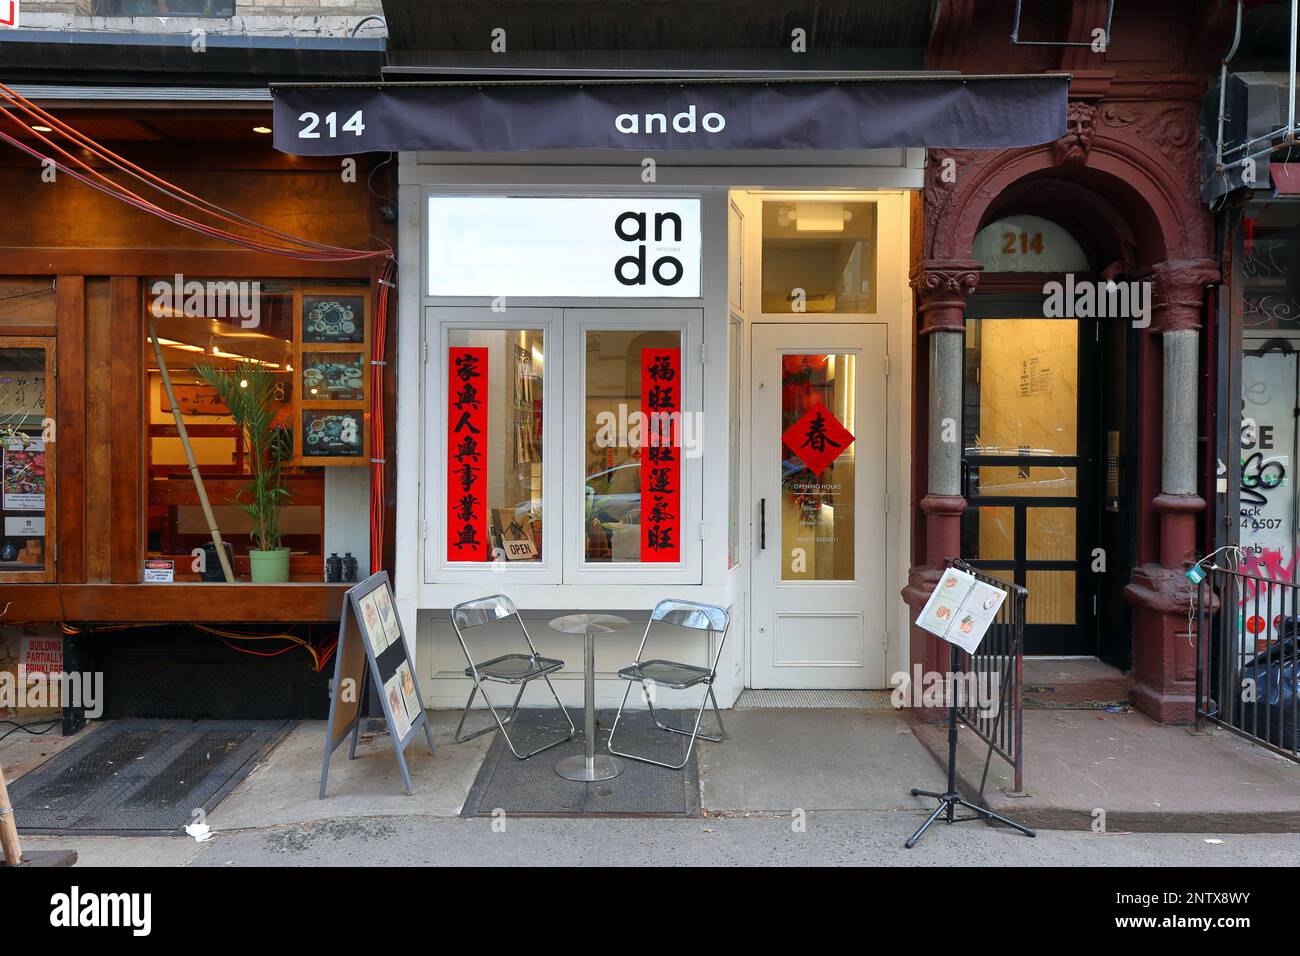 ANDO patisserie, 214 E 10th St, New York, NYC storefront photo of a Chinese French pastry shop in Manhattan's East Village neighborhood. Stock Photo